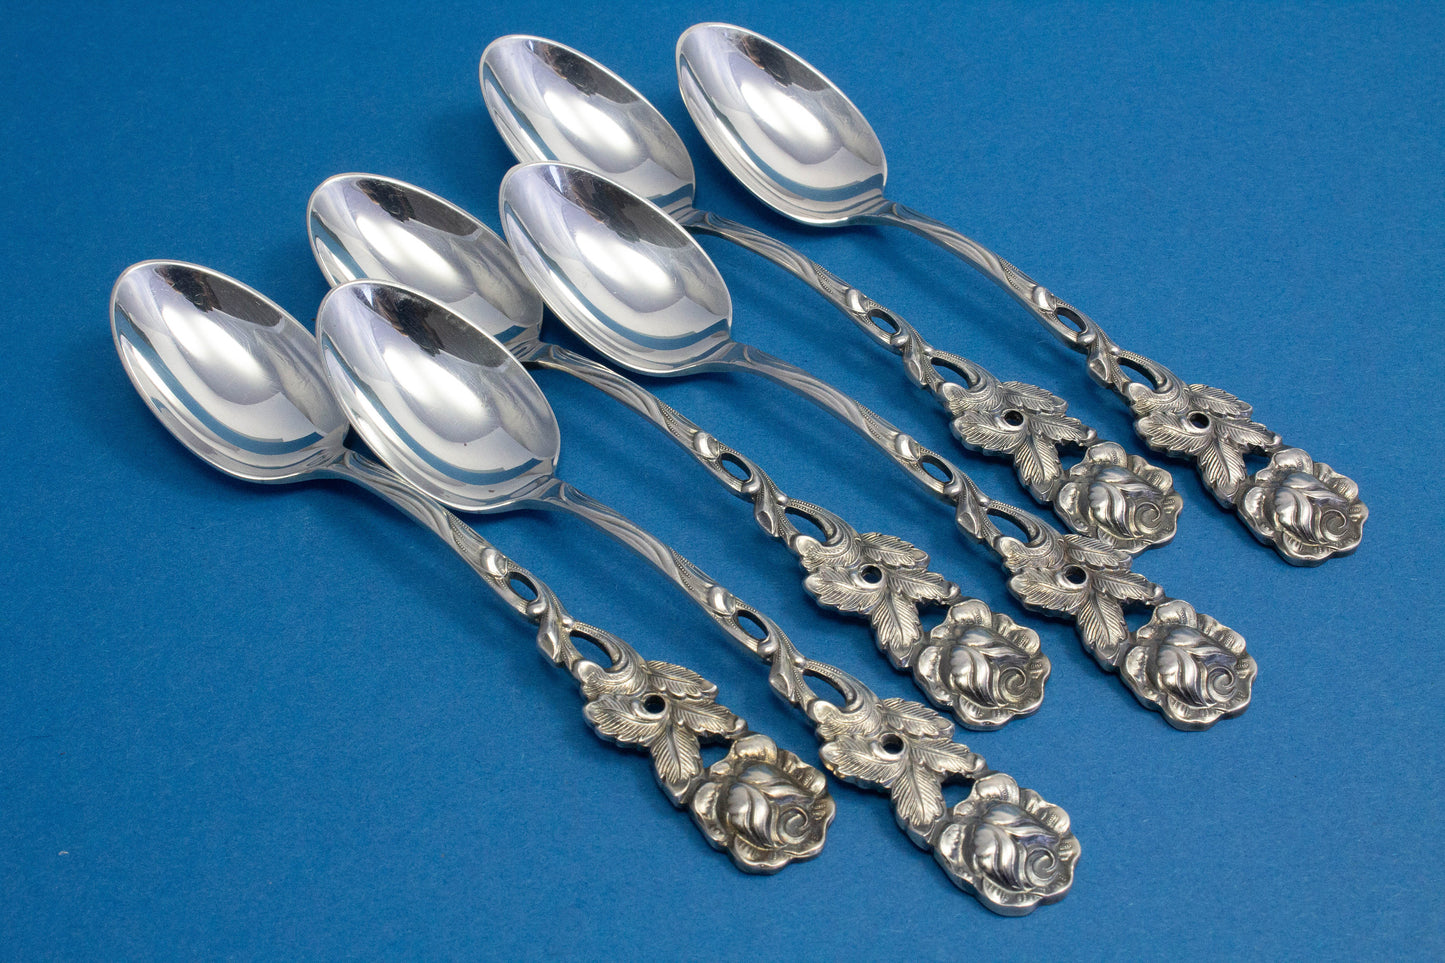 6 mocha spoons with roses, silver plated